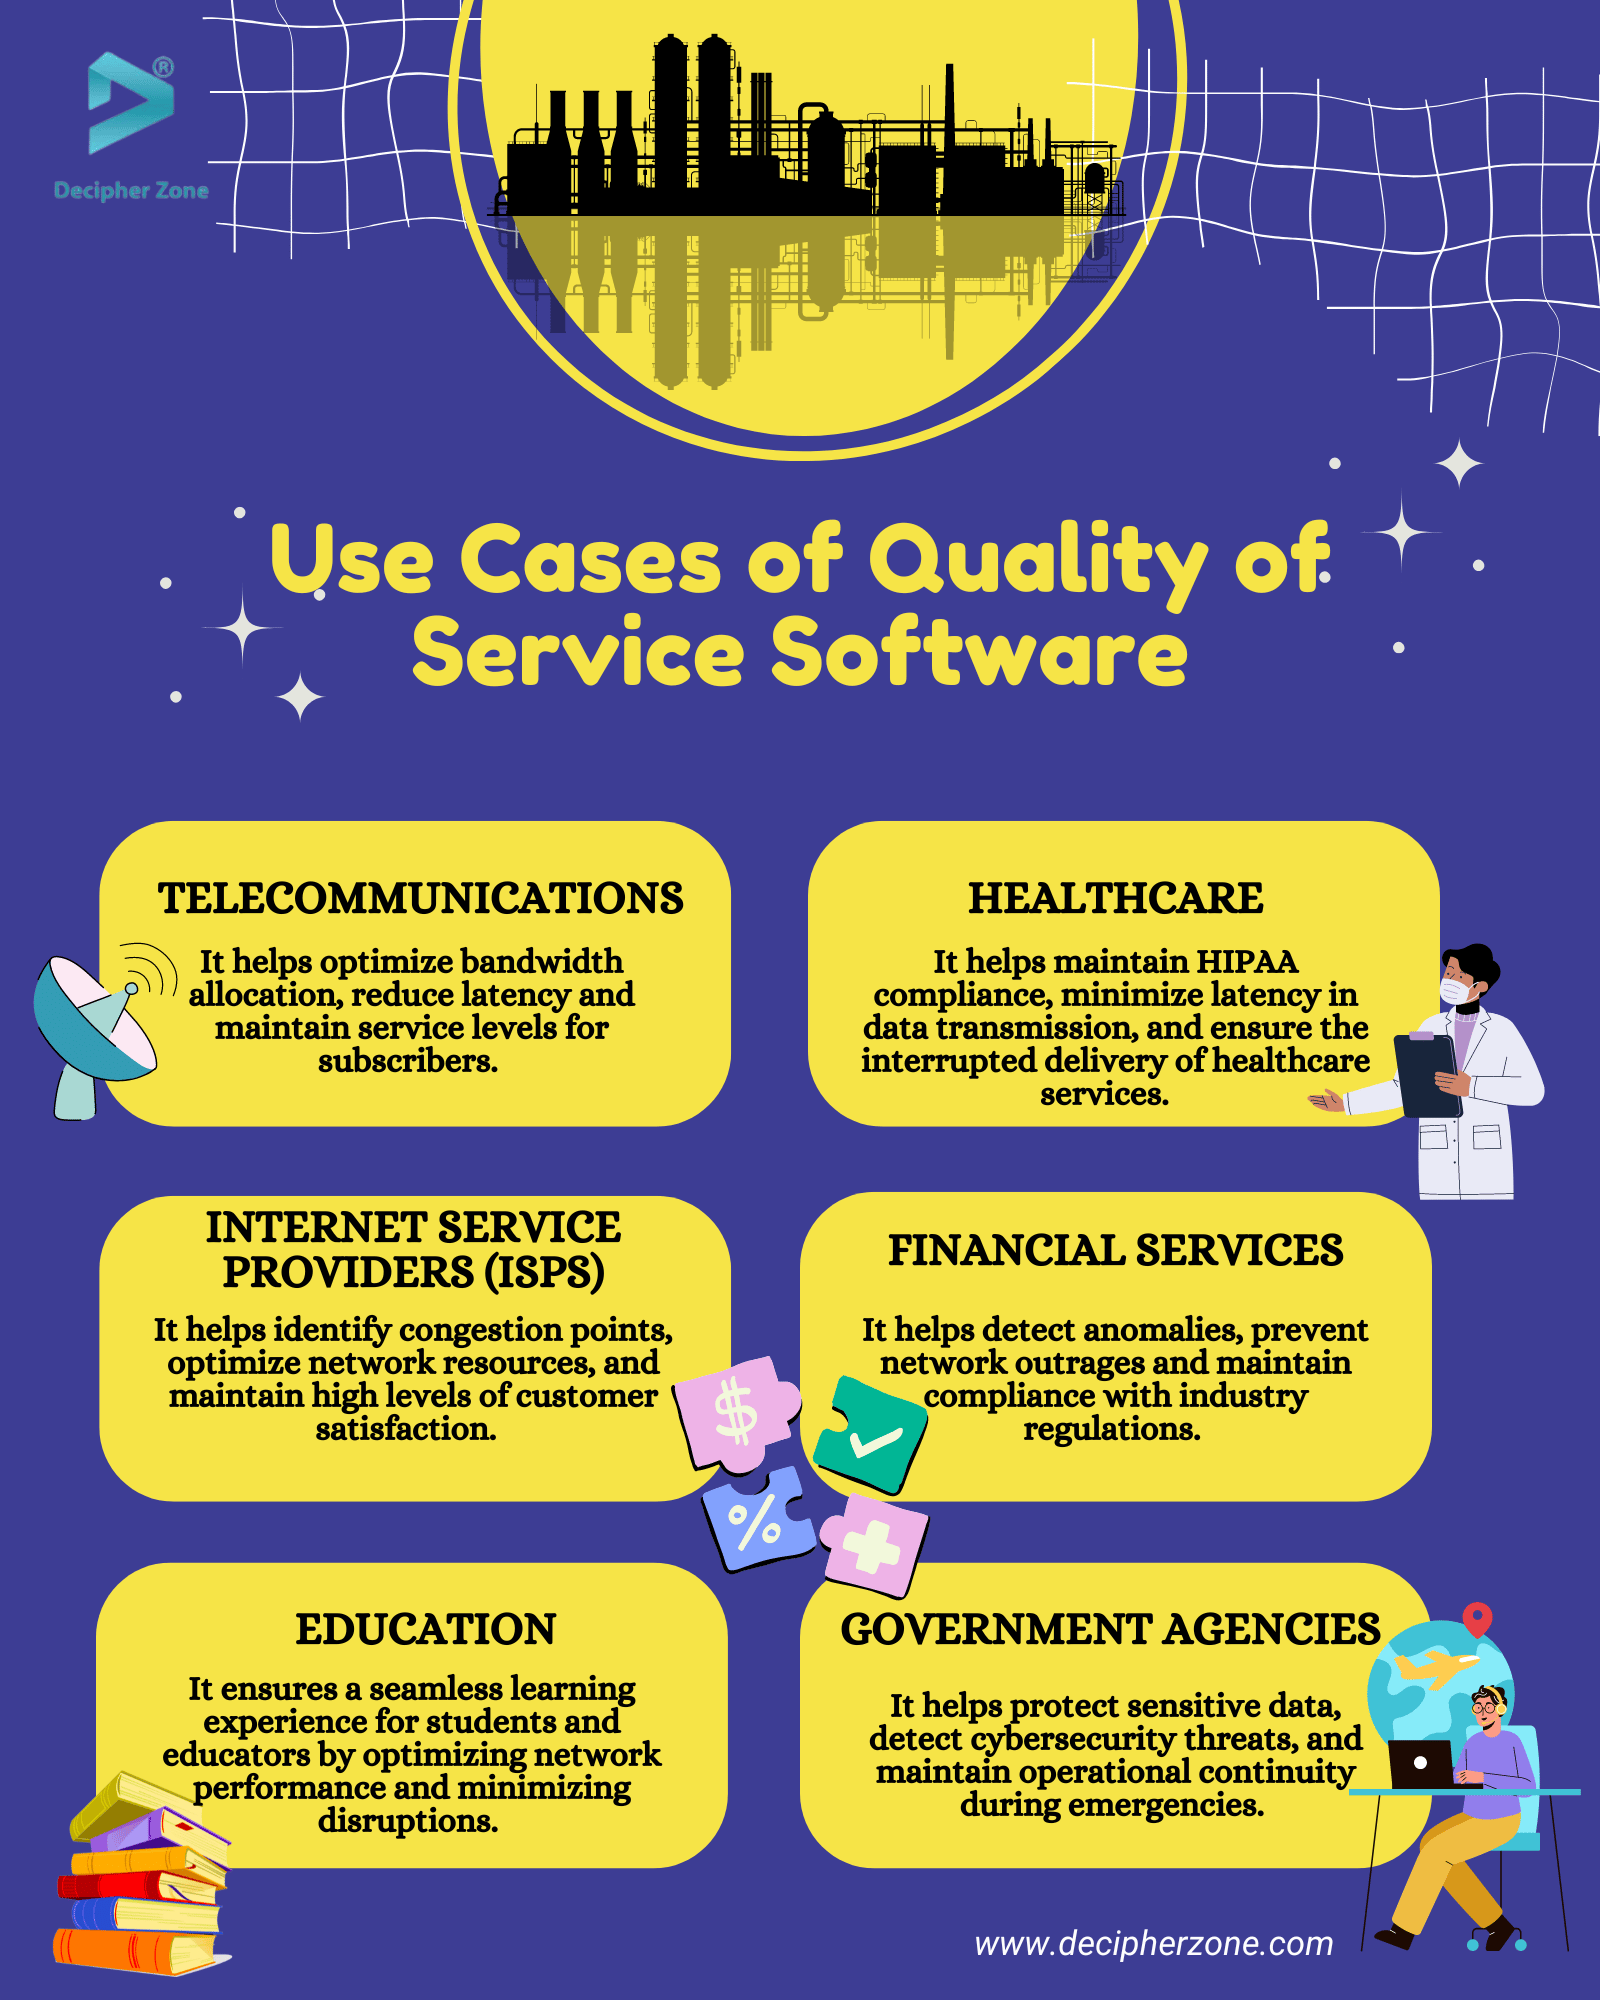 Use Cases of Quality of Service Software